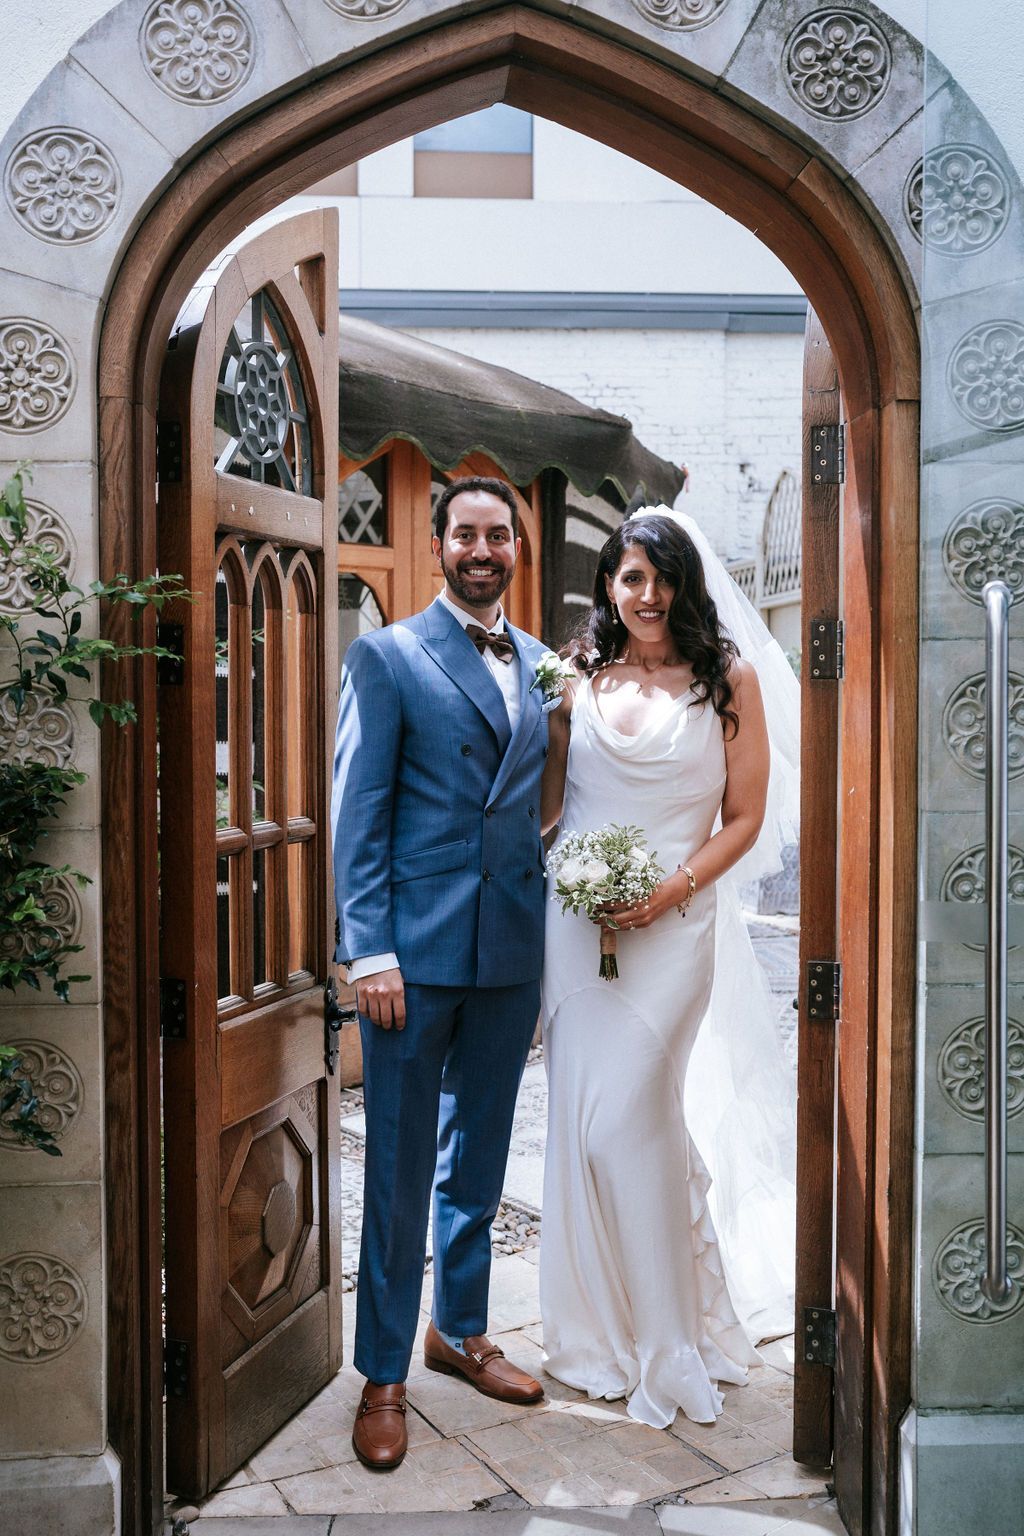 Groom in blue suit standing and smiling with bride in a door archway